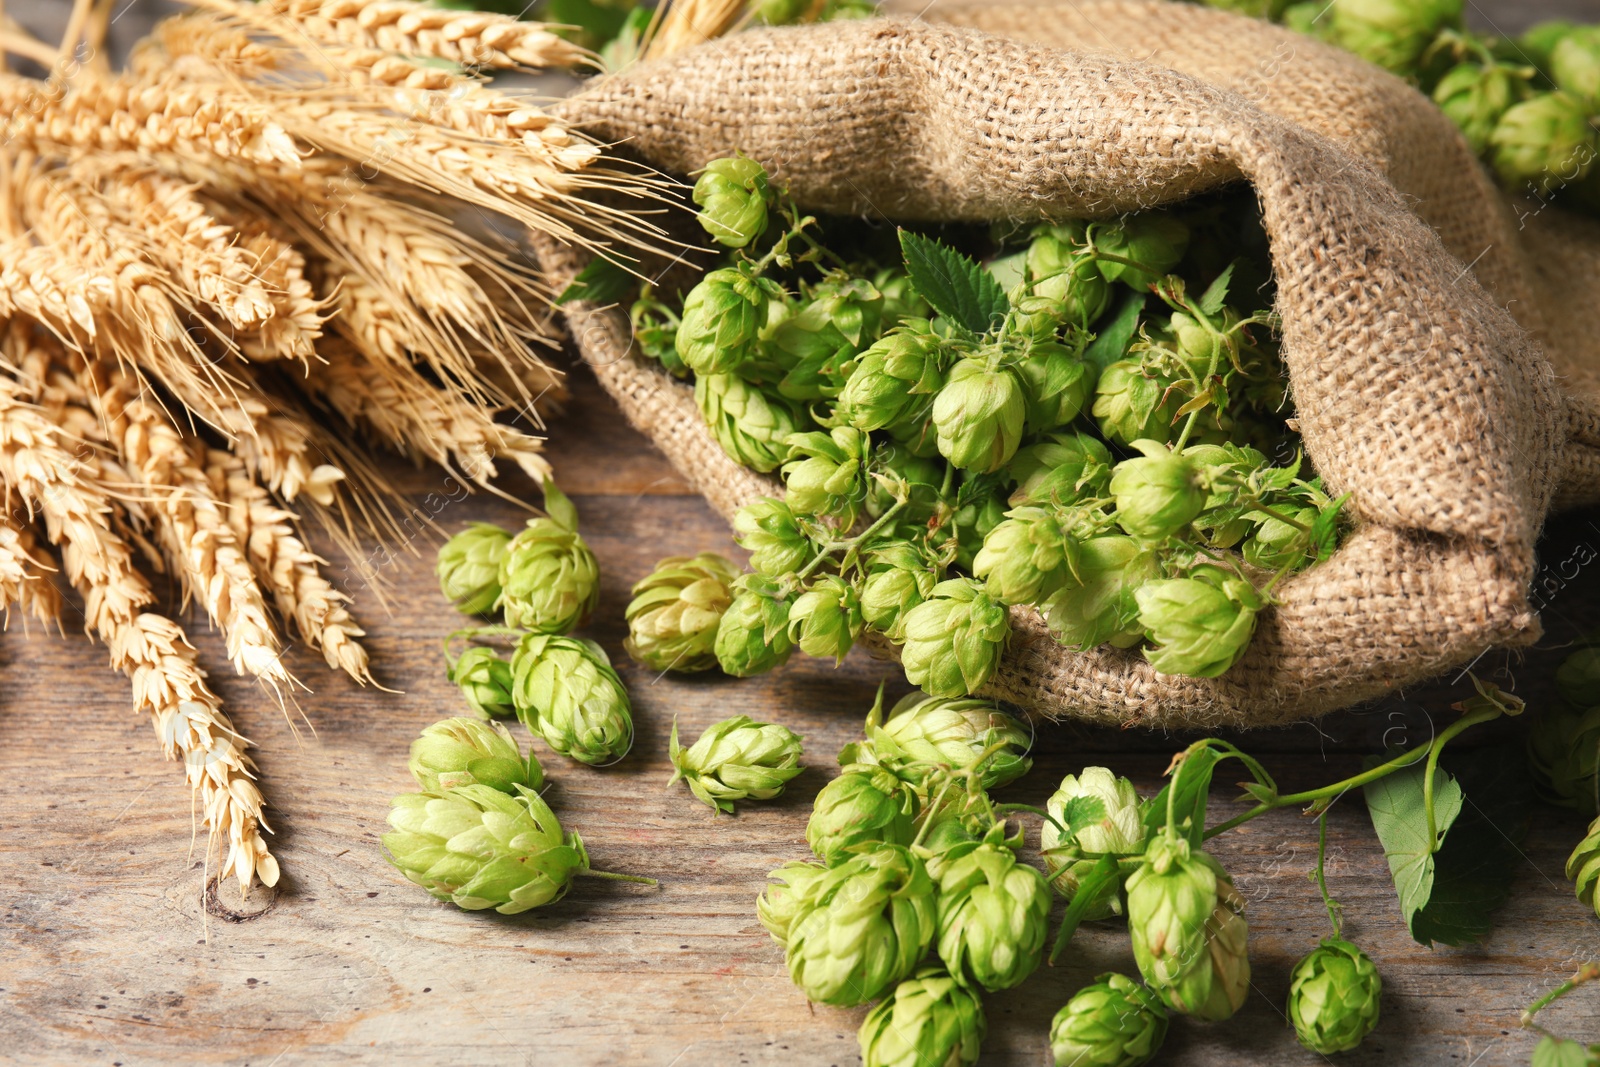 Photo of Fresh green hops and wheat spikes on wooden table. Beer production